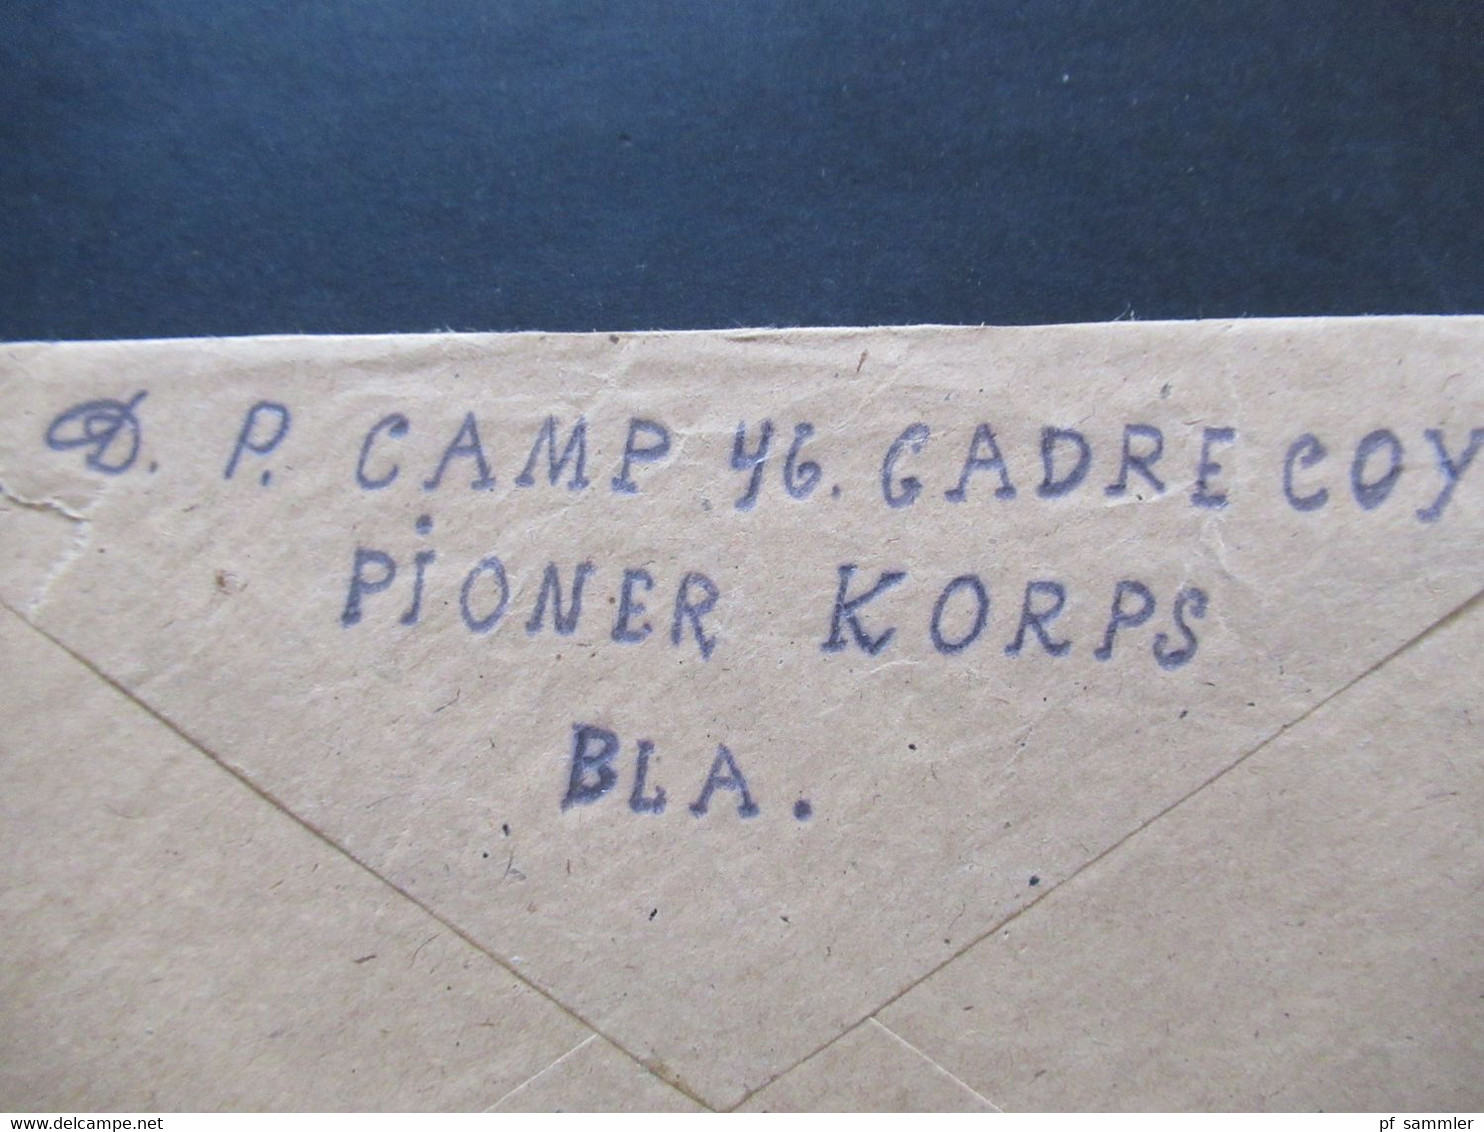 19. Mai 1945 Polish Forces Absender Displaced Persons Camp 46 Gadre Coy Pioner Korps Bla. An: Polish Red Cross London - Lettres & Documents